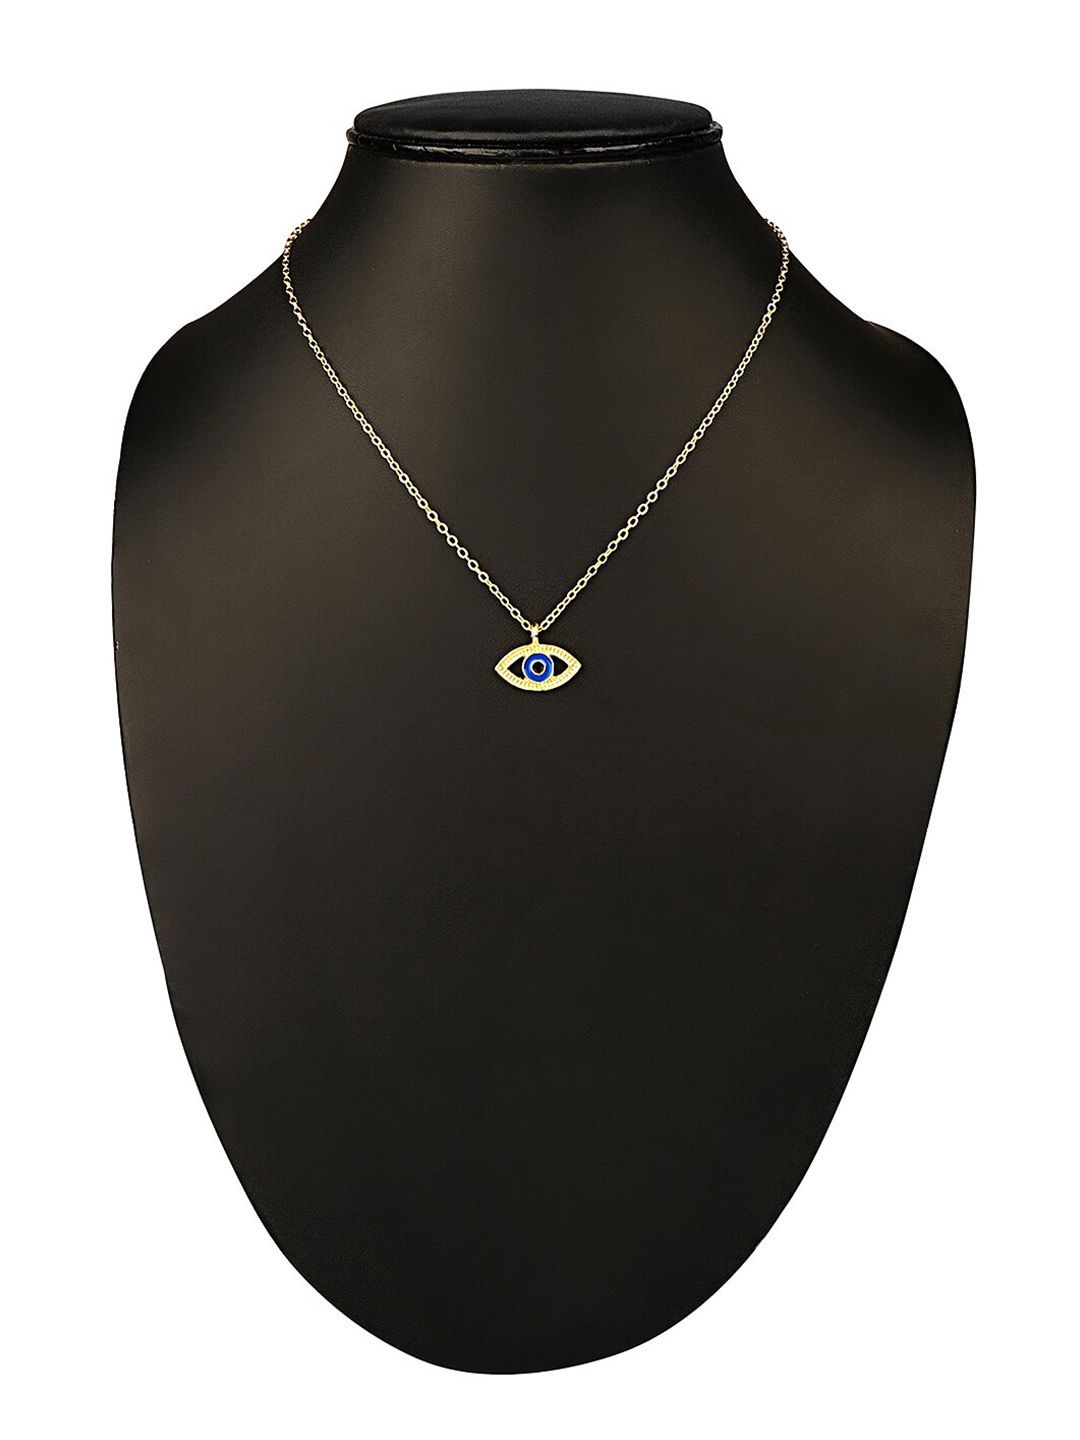 Vembley Gold-Plated & Blue Enamelled Evil Eye Pendant Necklace Price in India